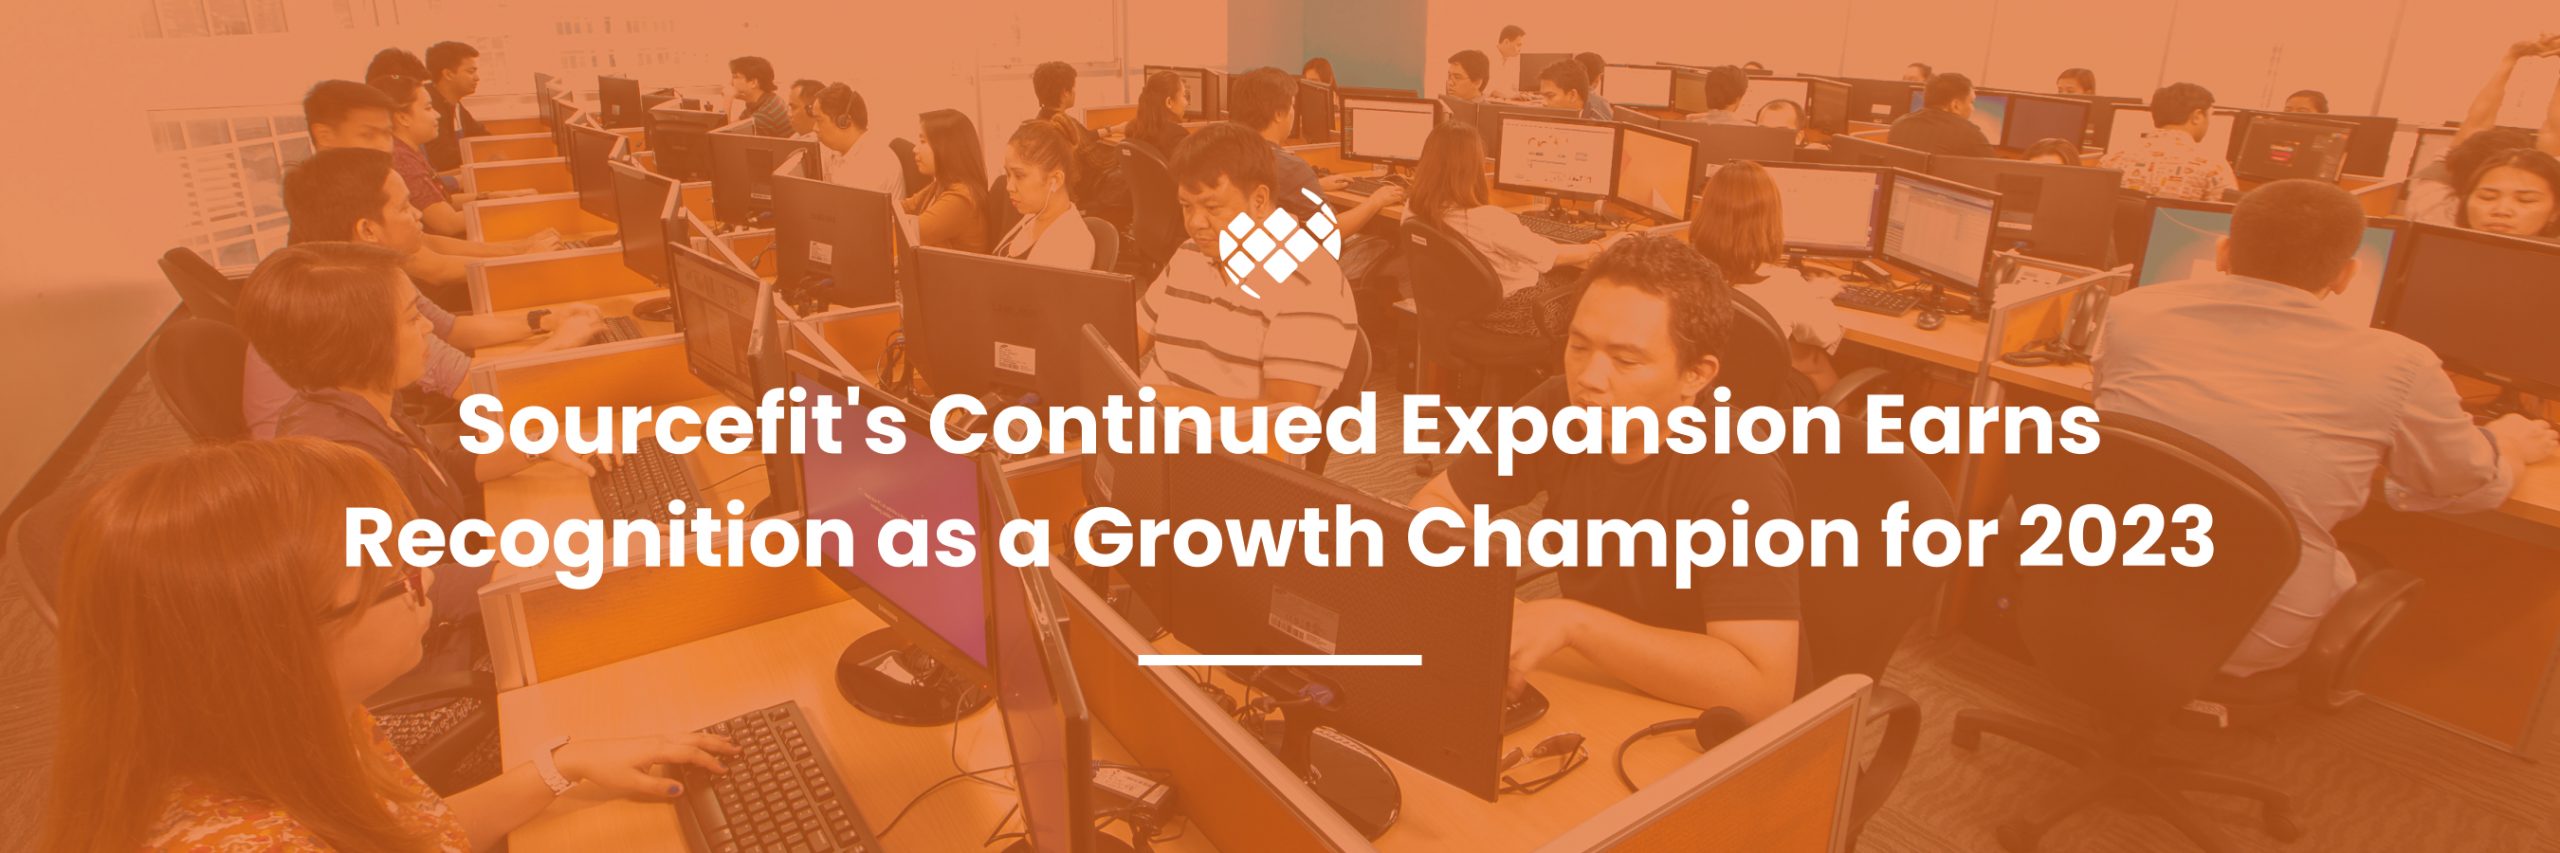 Sourcefit Growth Champion